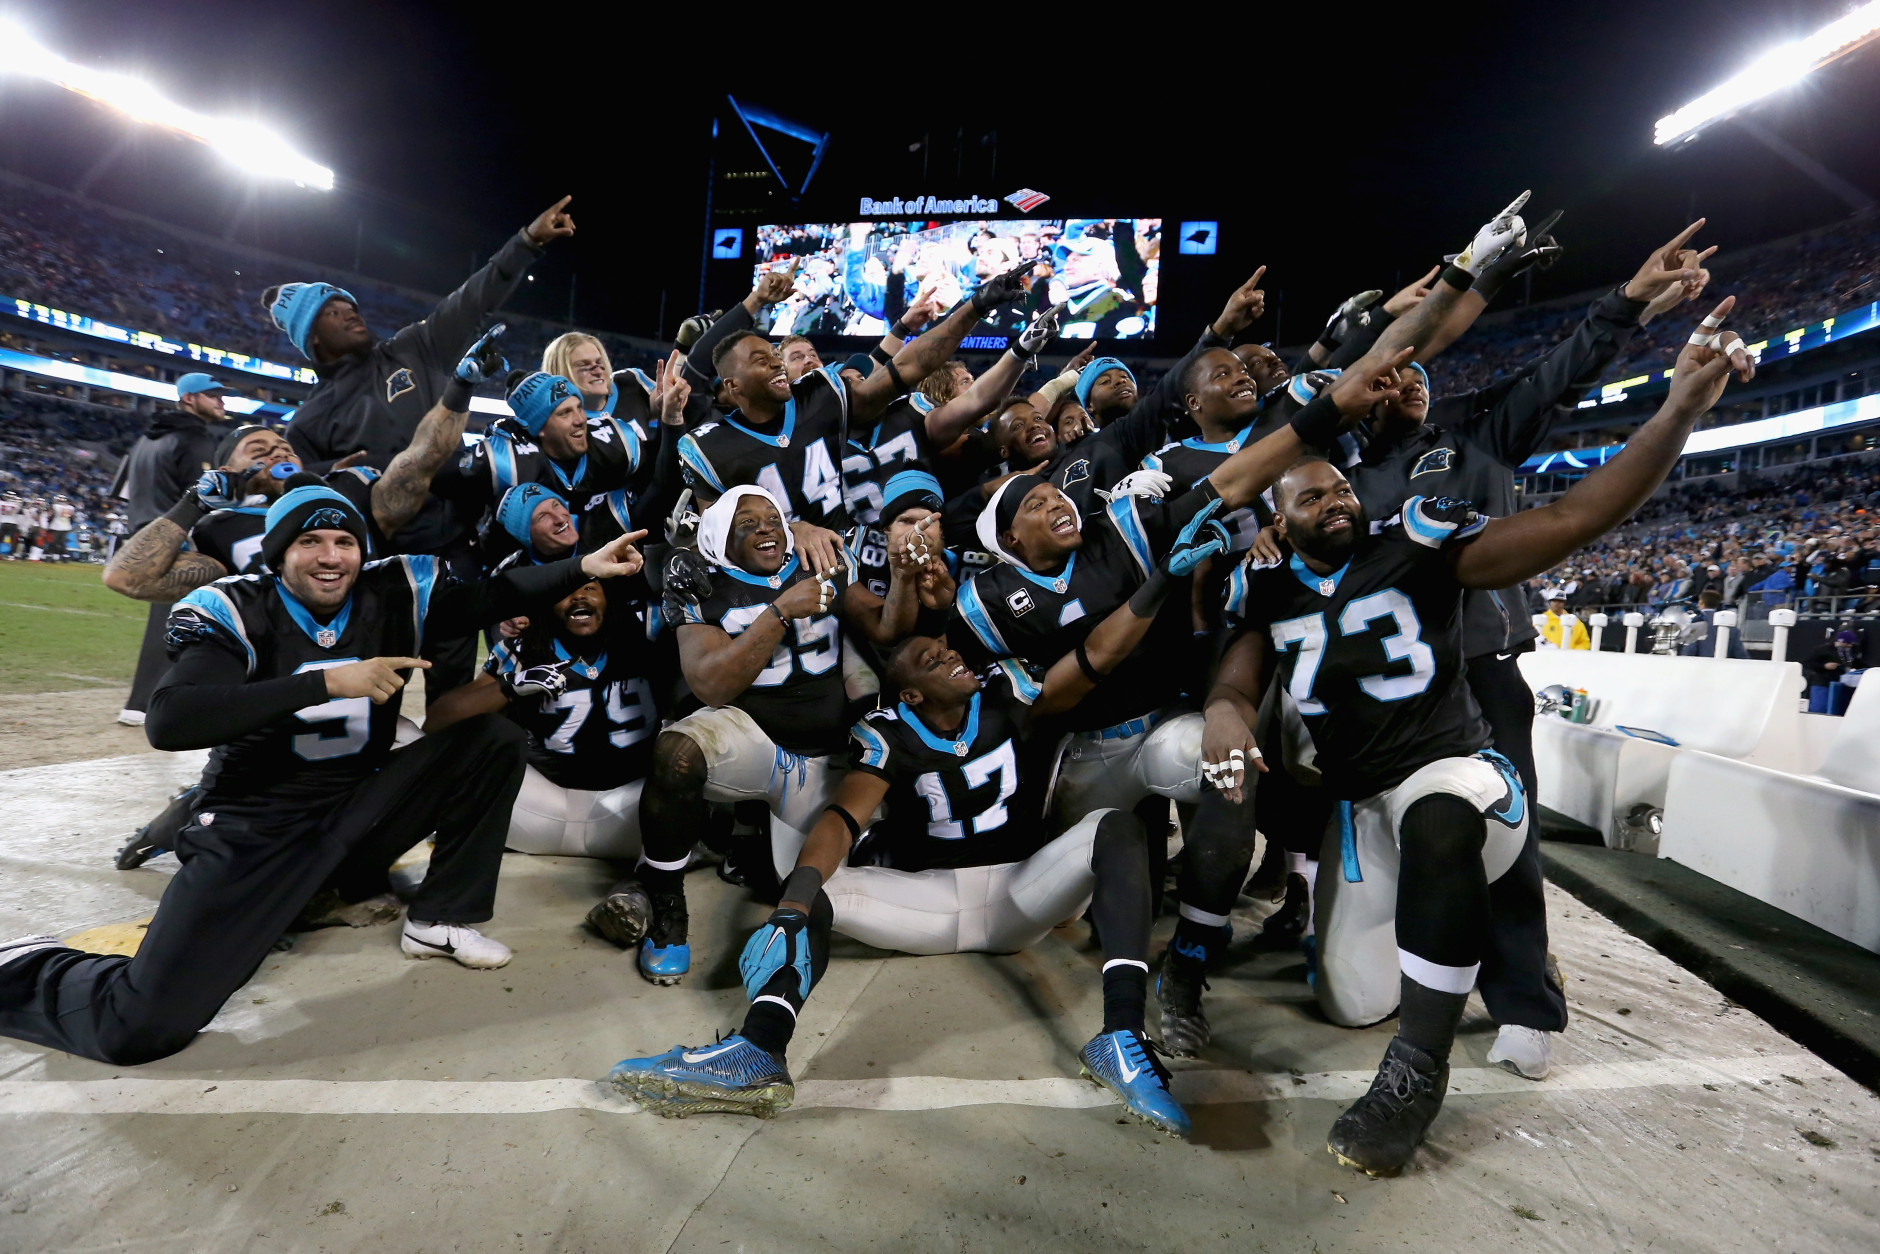 CHARLOTTE, NC - JANUARY 03:  Cam Newton #1 of the Carolina Panthers organizes a team photo in the bench area during their game against the Tampa Bay Buccaneers at Bank of America Stadium on January 3, 2016 in Charlotte, North Carolina.  The Panthers won 38-10 to clinch home field advantage for the playoffs  (Photo by Streeter Lecka/Getty Images)